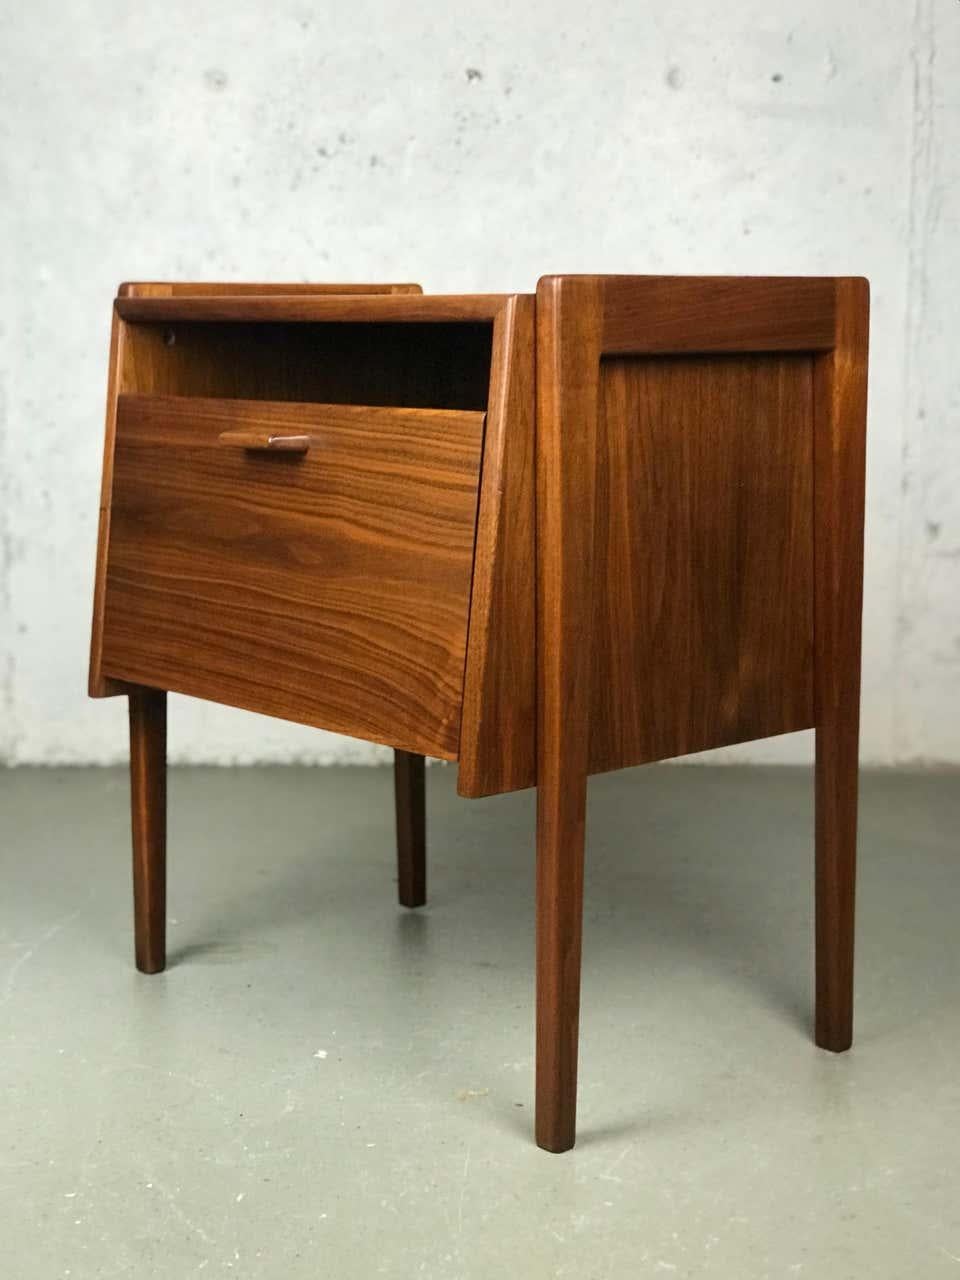 Striking walnut nightstand by Jens Risom, 1960s. This is a great design, with exoskeleton legs and sharp lines. It has been refinished but still has some very minor wear. Beautiful wood grain. Please see pictures.
Also can be used as a record